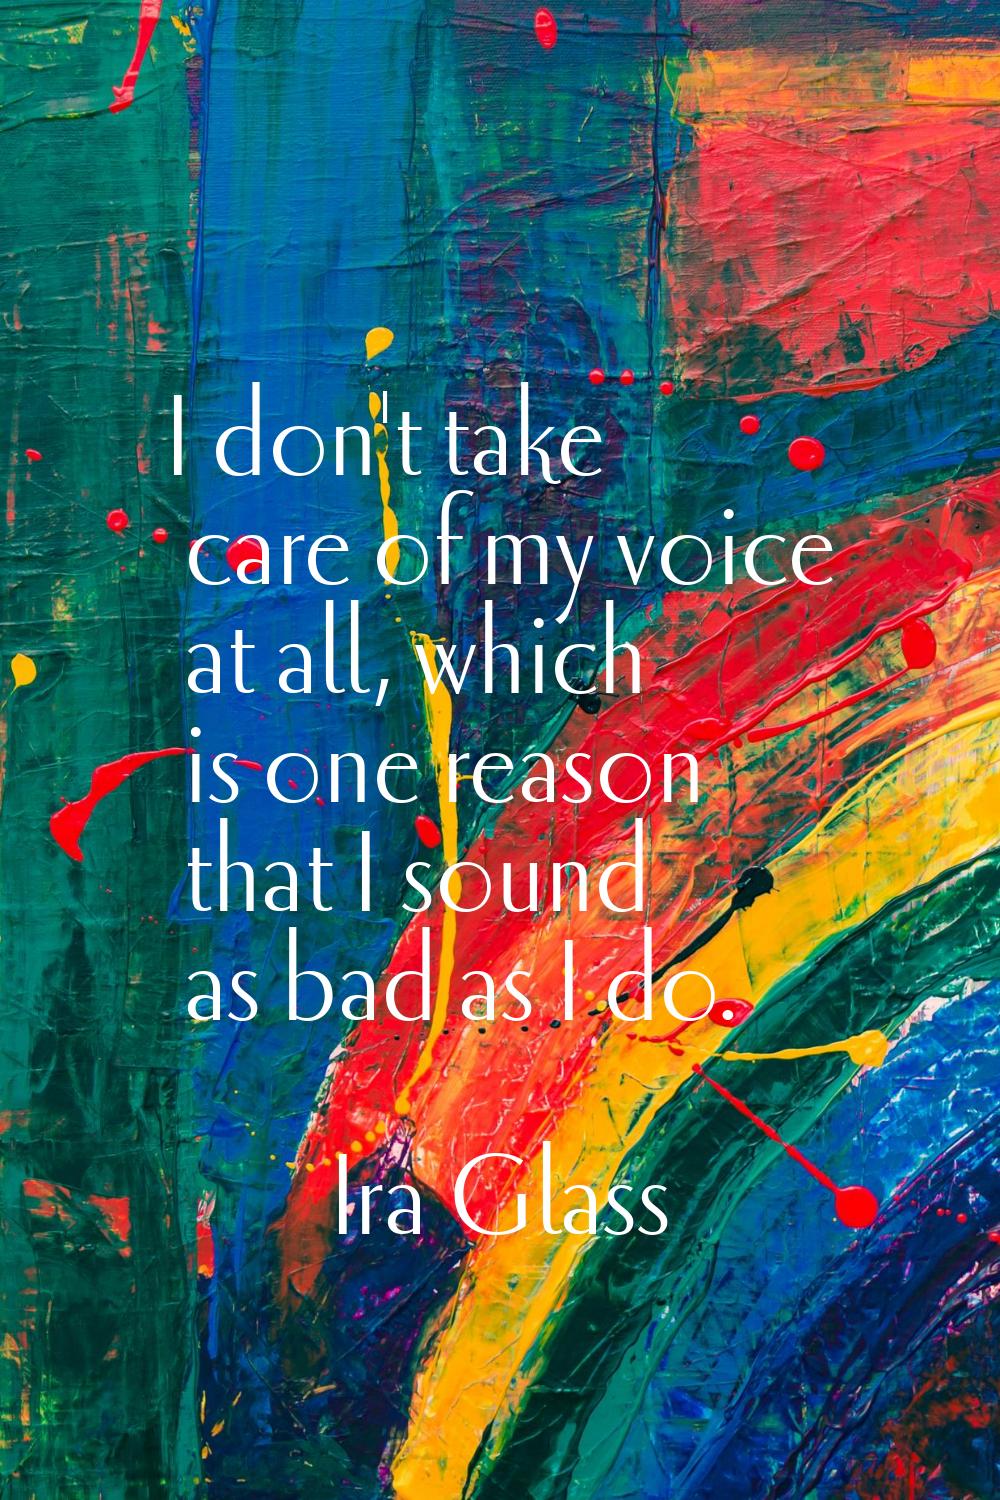 I don't take care of my voice at all, which is one reason that I sound as bad as I do.